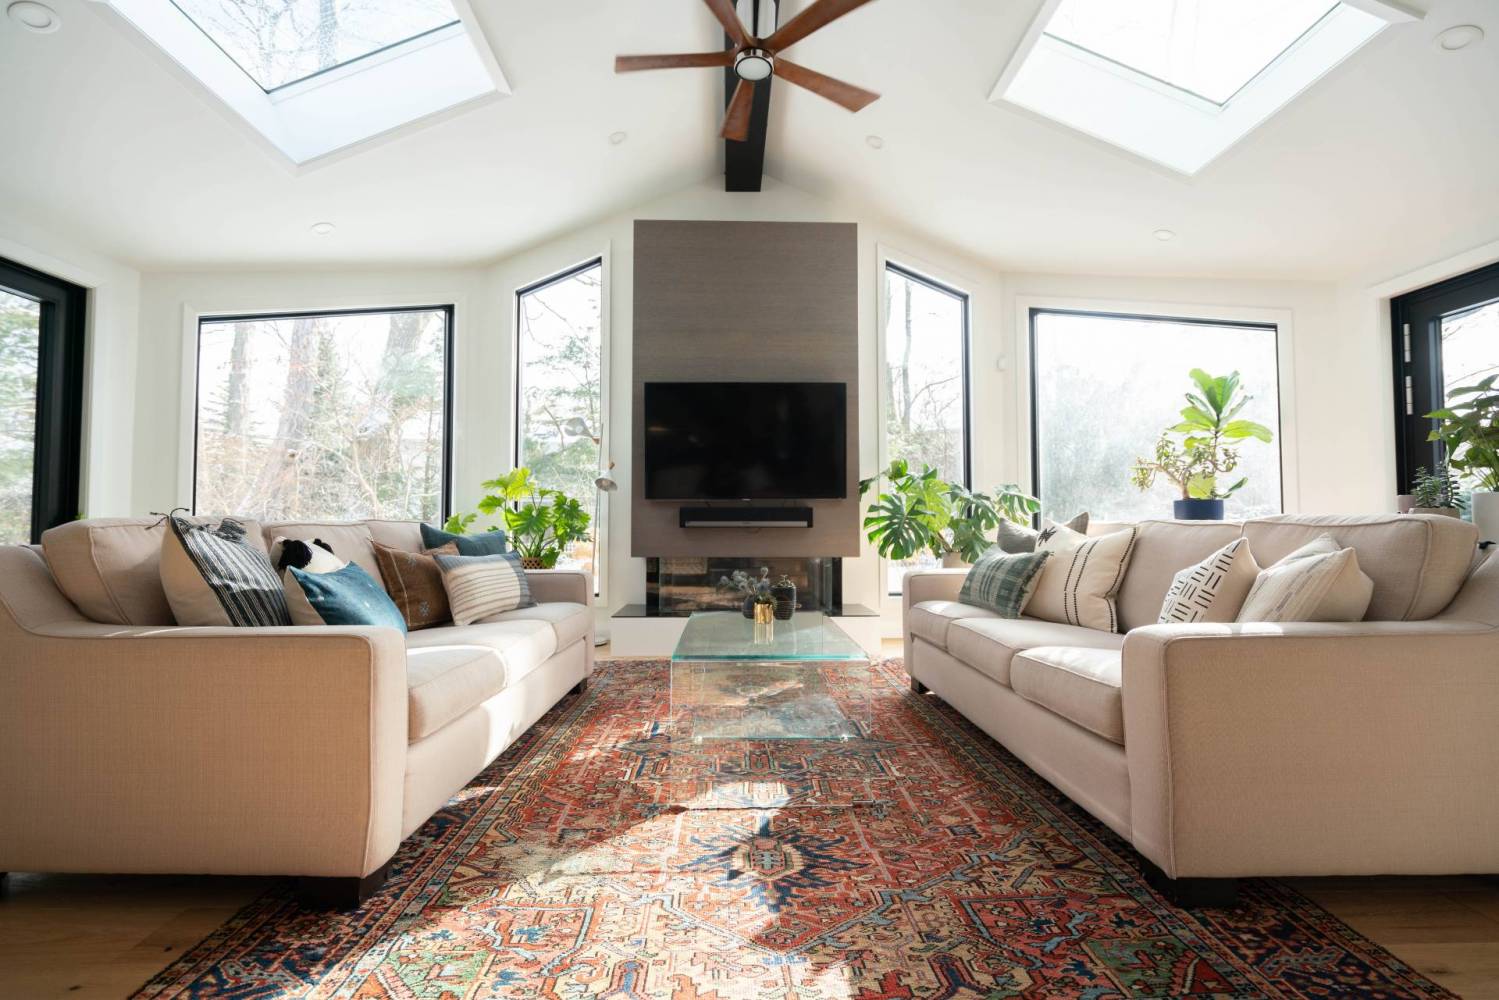 What Size Ceiling Fan Do You Need? Leesburg Electrician for Ceiling Fans